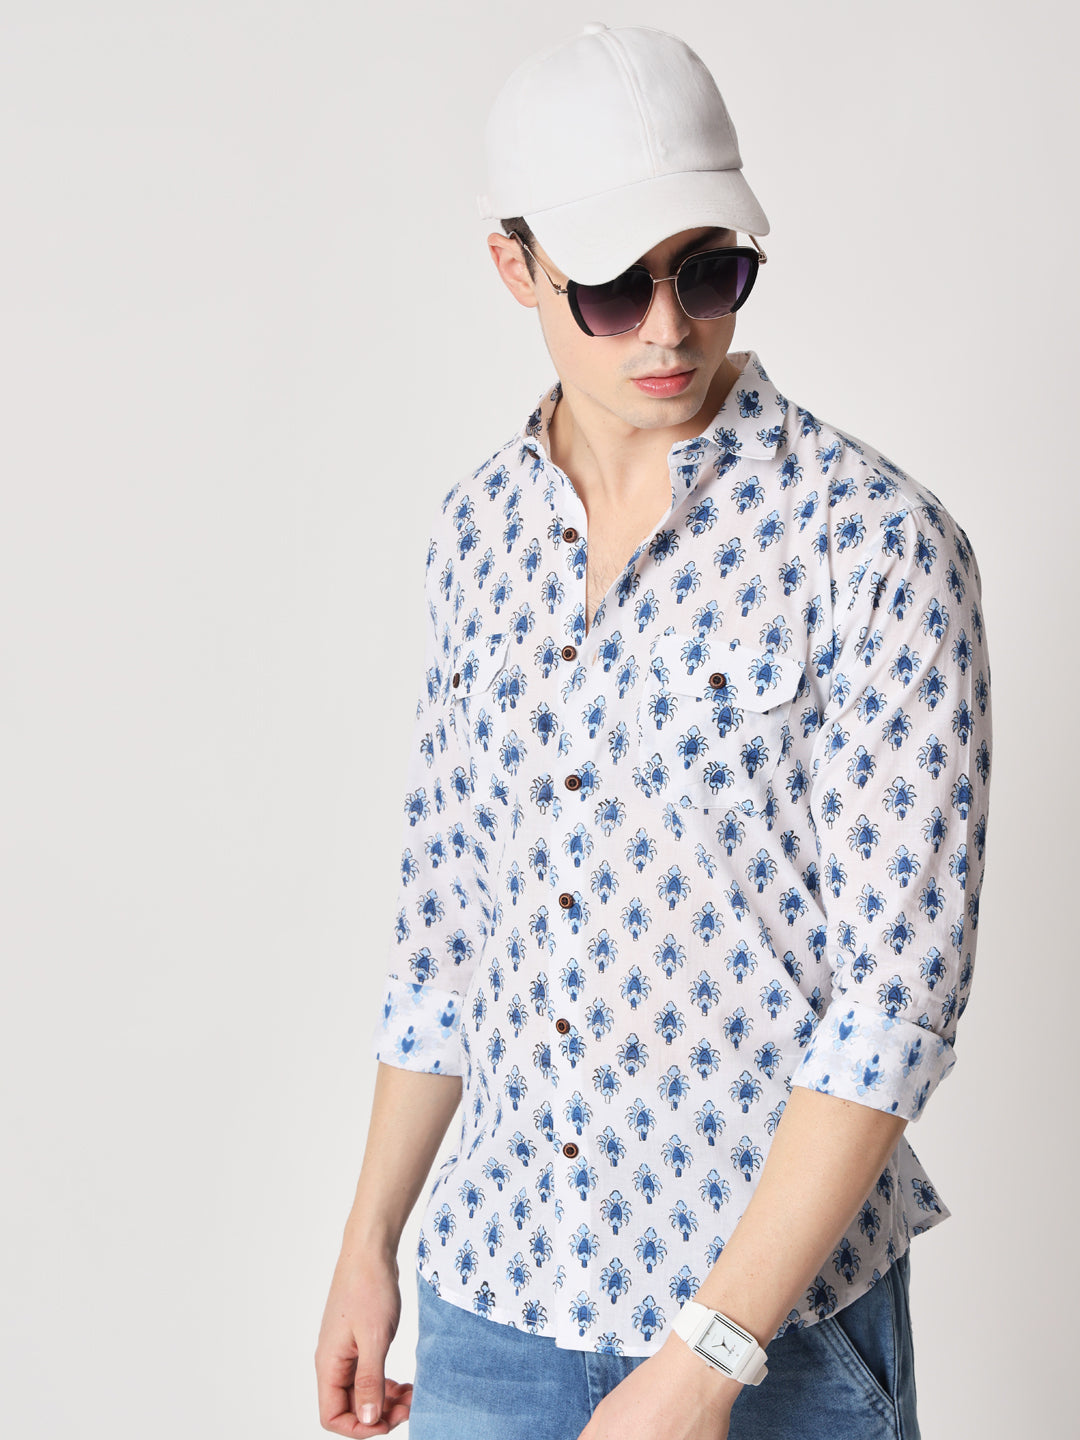 Firangi Yarn 100% Cotton Block Printed Casual Full Sleeves With Flap Pockets Men's Party Wear Shirt Blue/White